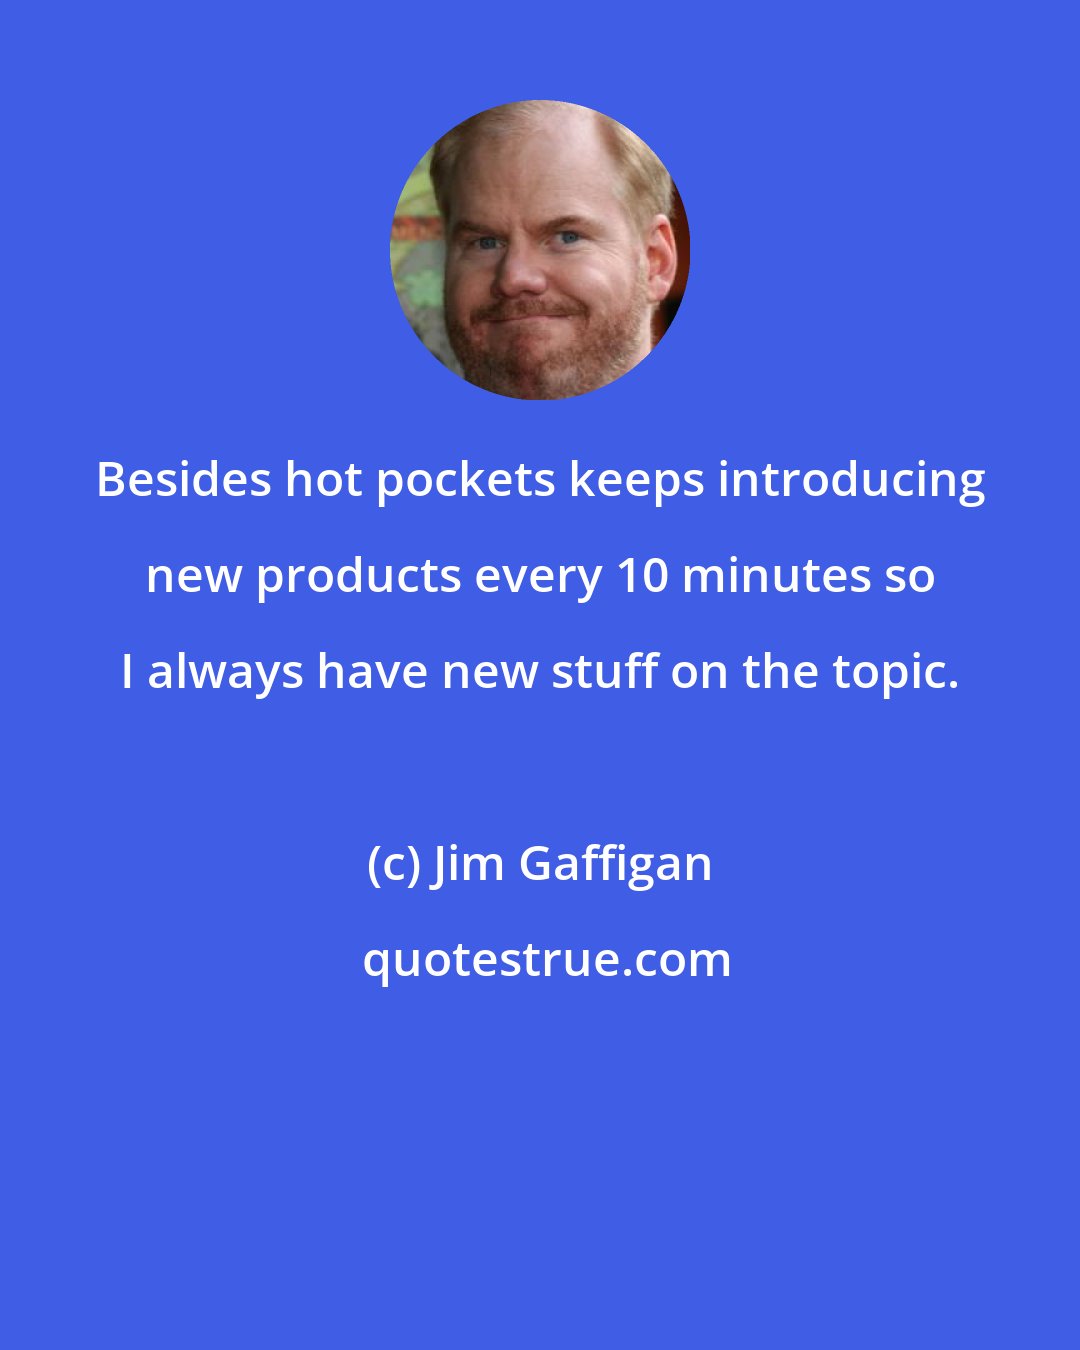 Jim Gaffigan: Besides hot pockets keeps introducing new products every 10 minutes so I always have new stuff on the topic.